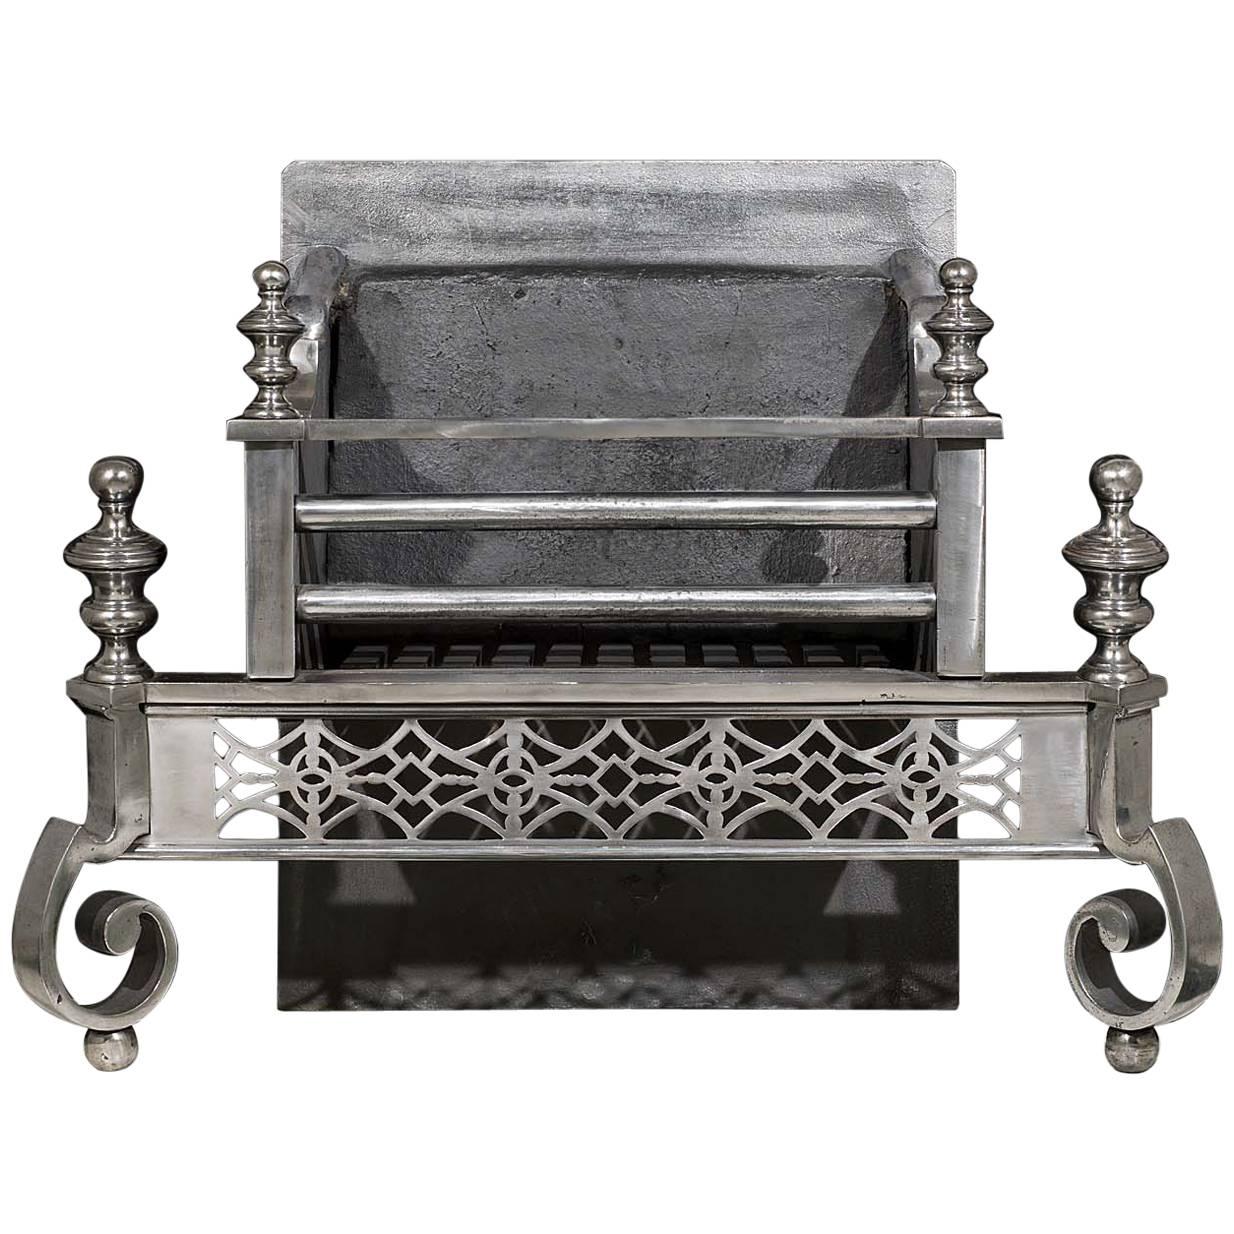 Polished Steel, Antique Georgian Style Antique Fire Grate